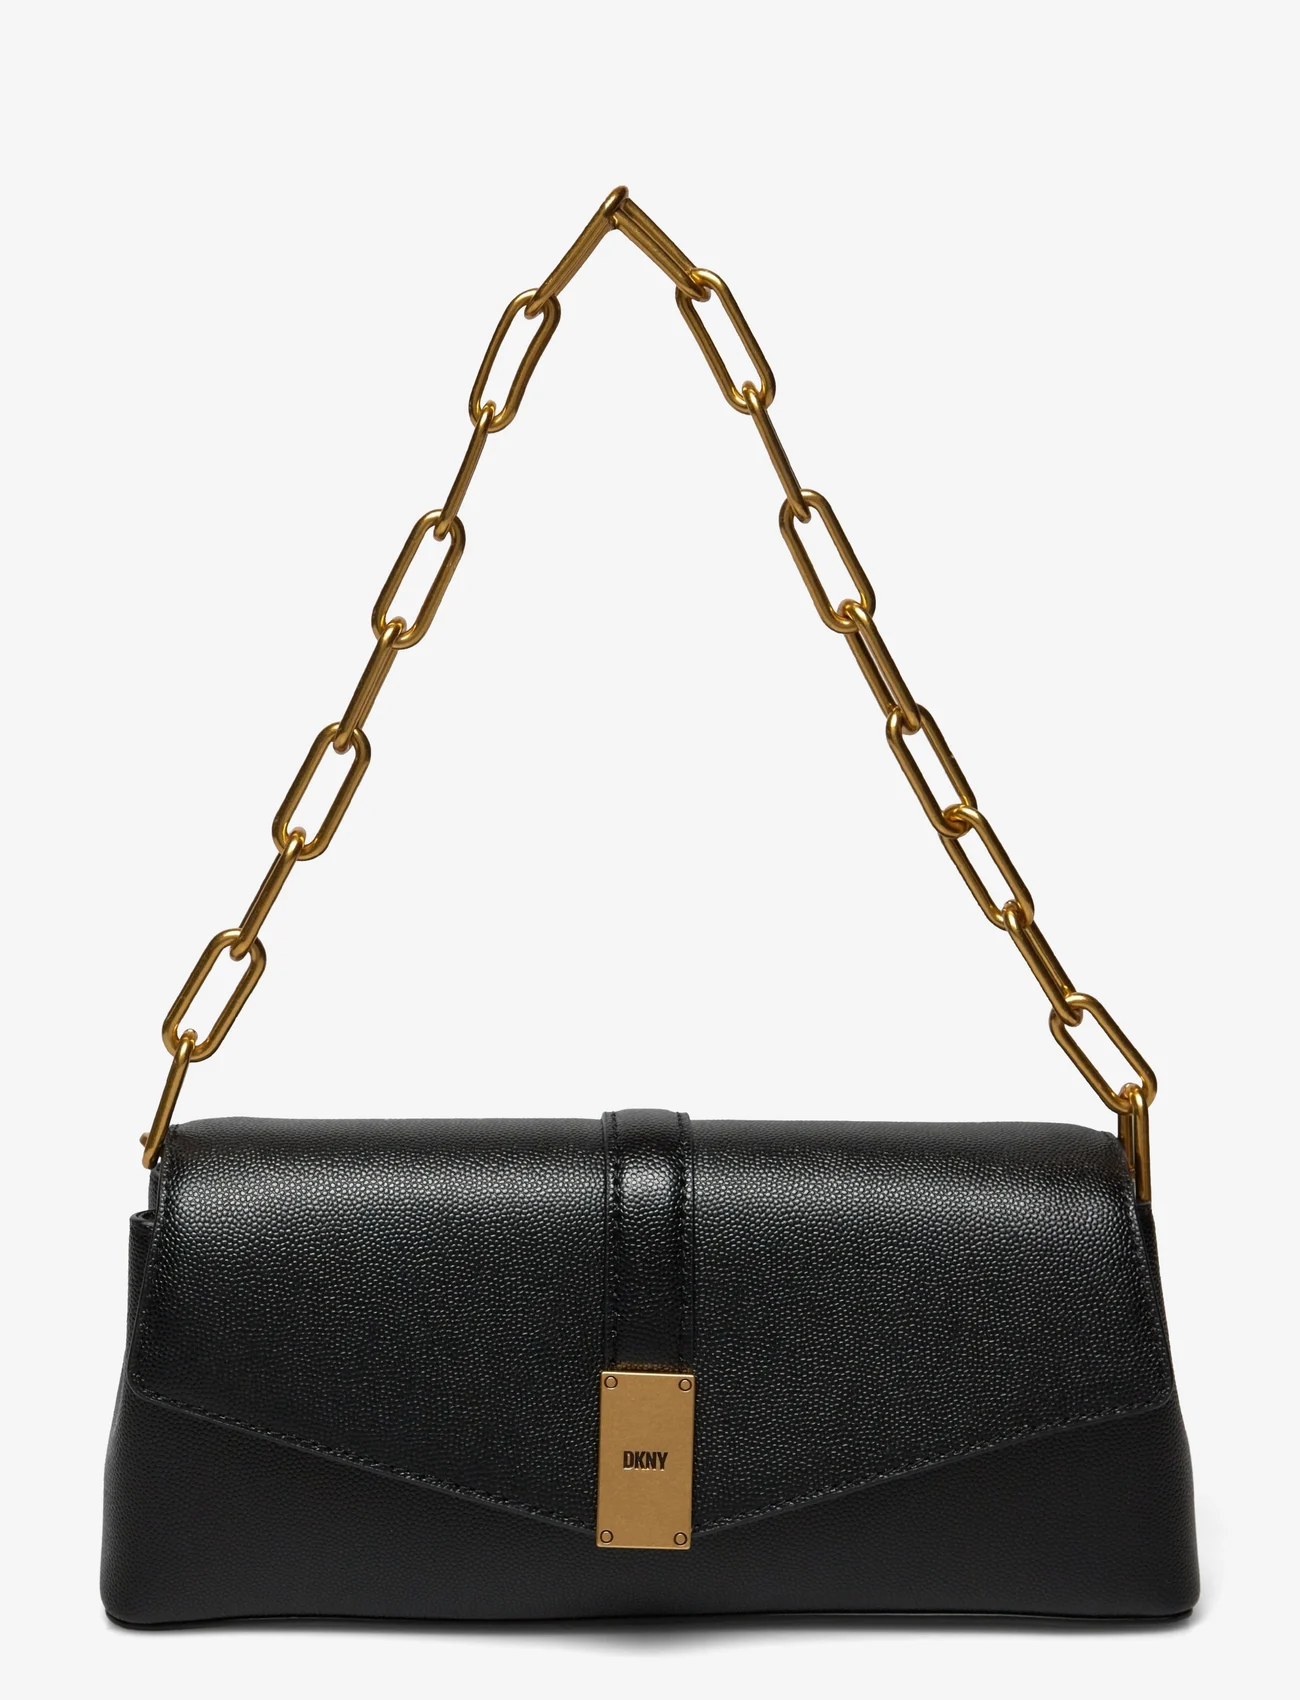 DKNY Bags - CONNER CLUTCH - bgd - blk/gold - 0